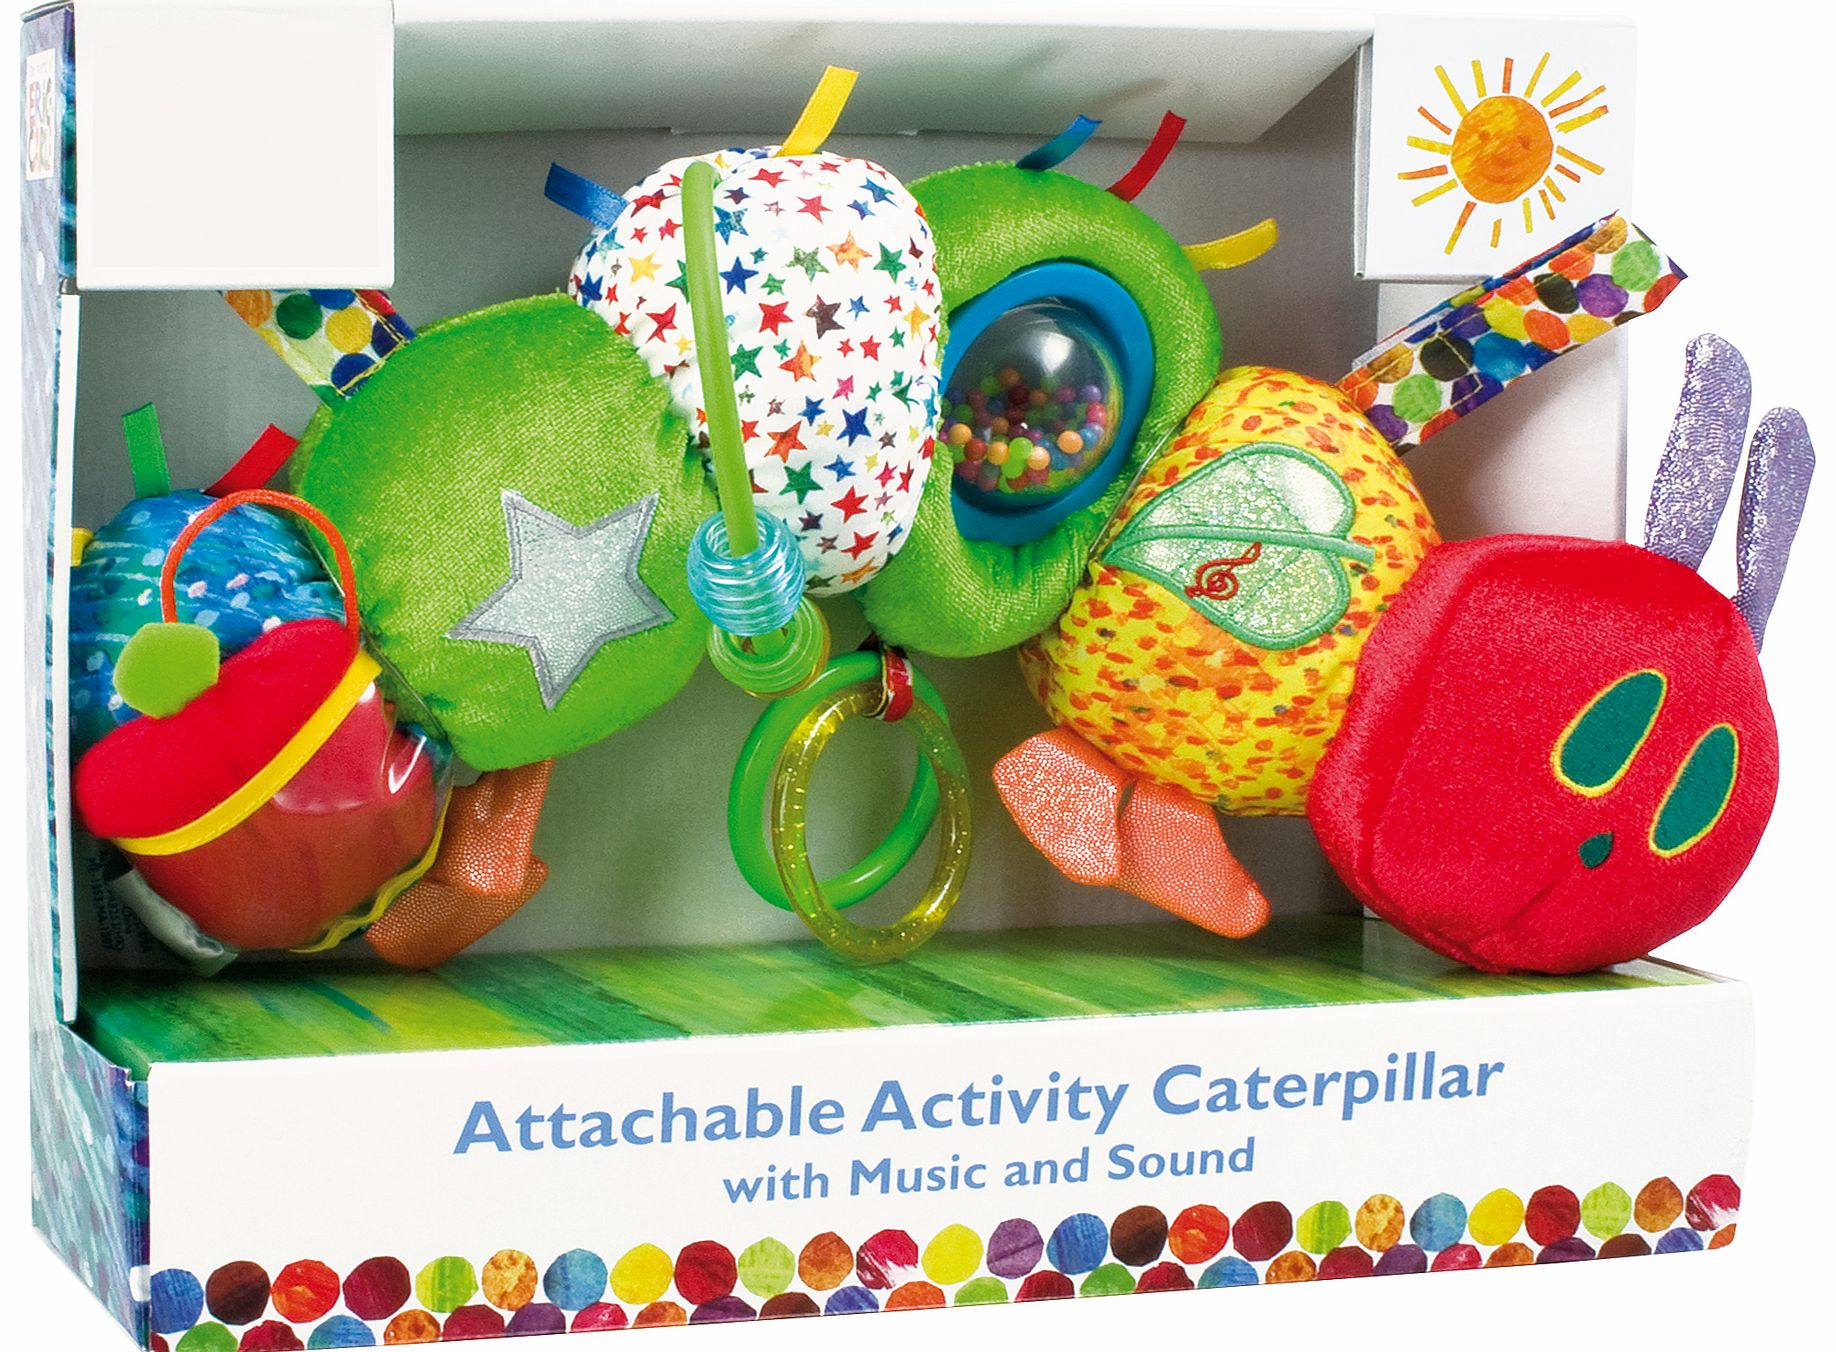 The Very Hungry Activity Caterpillar